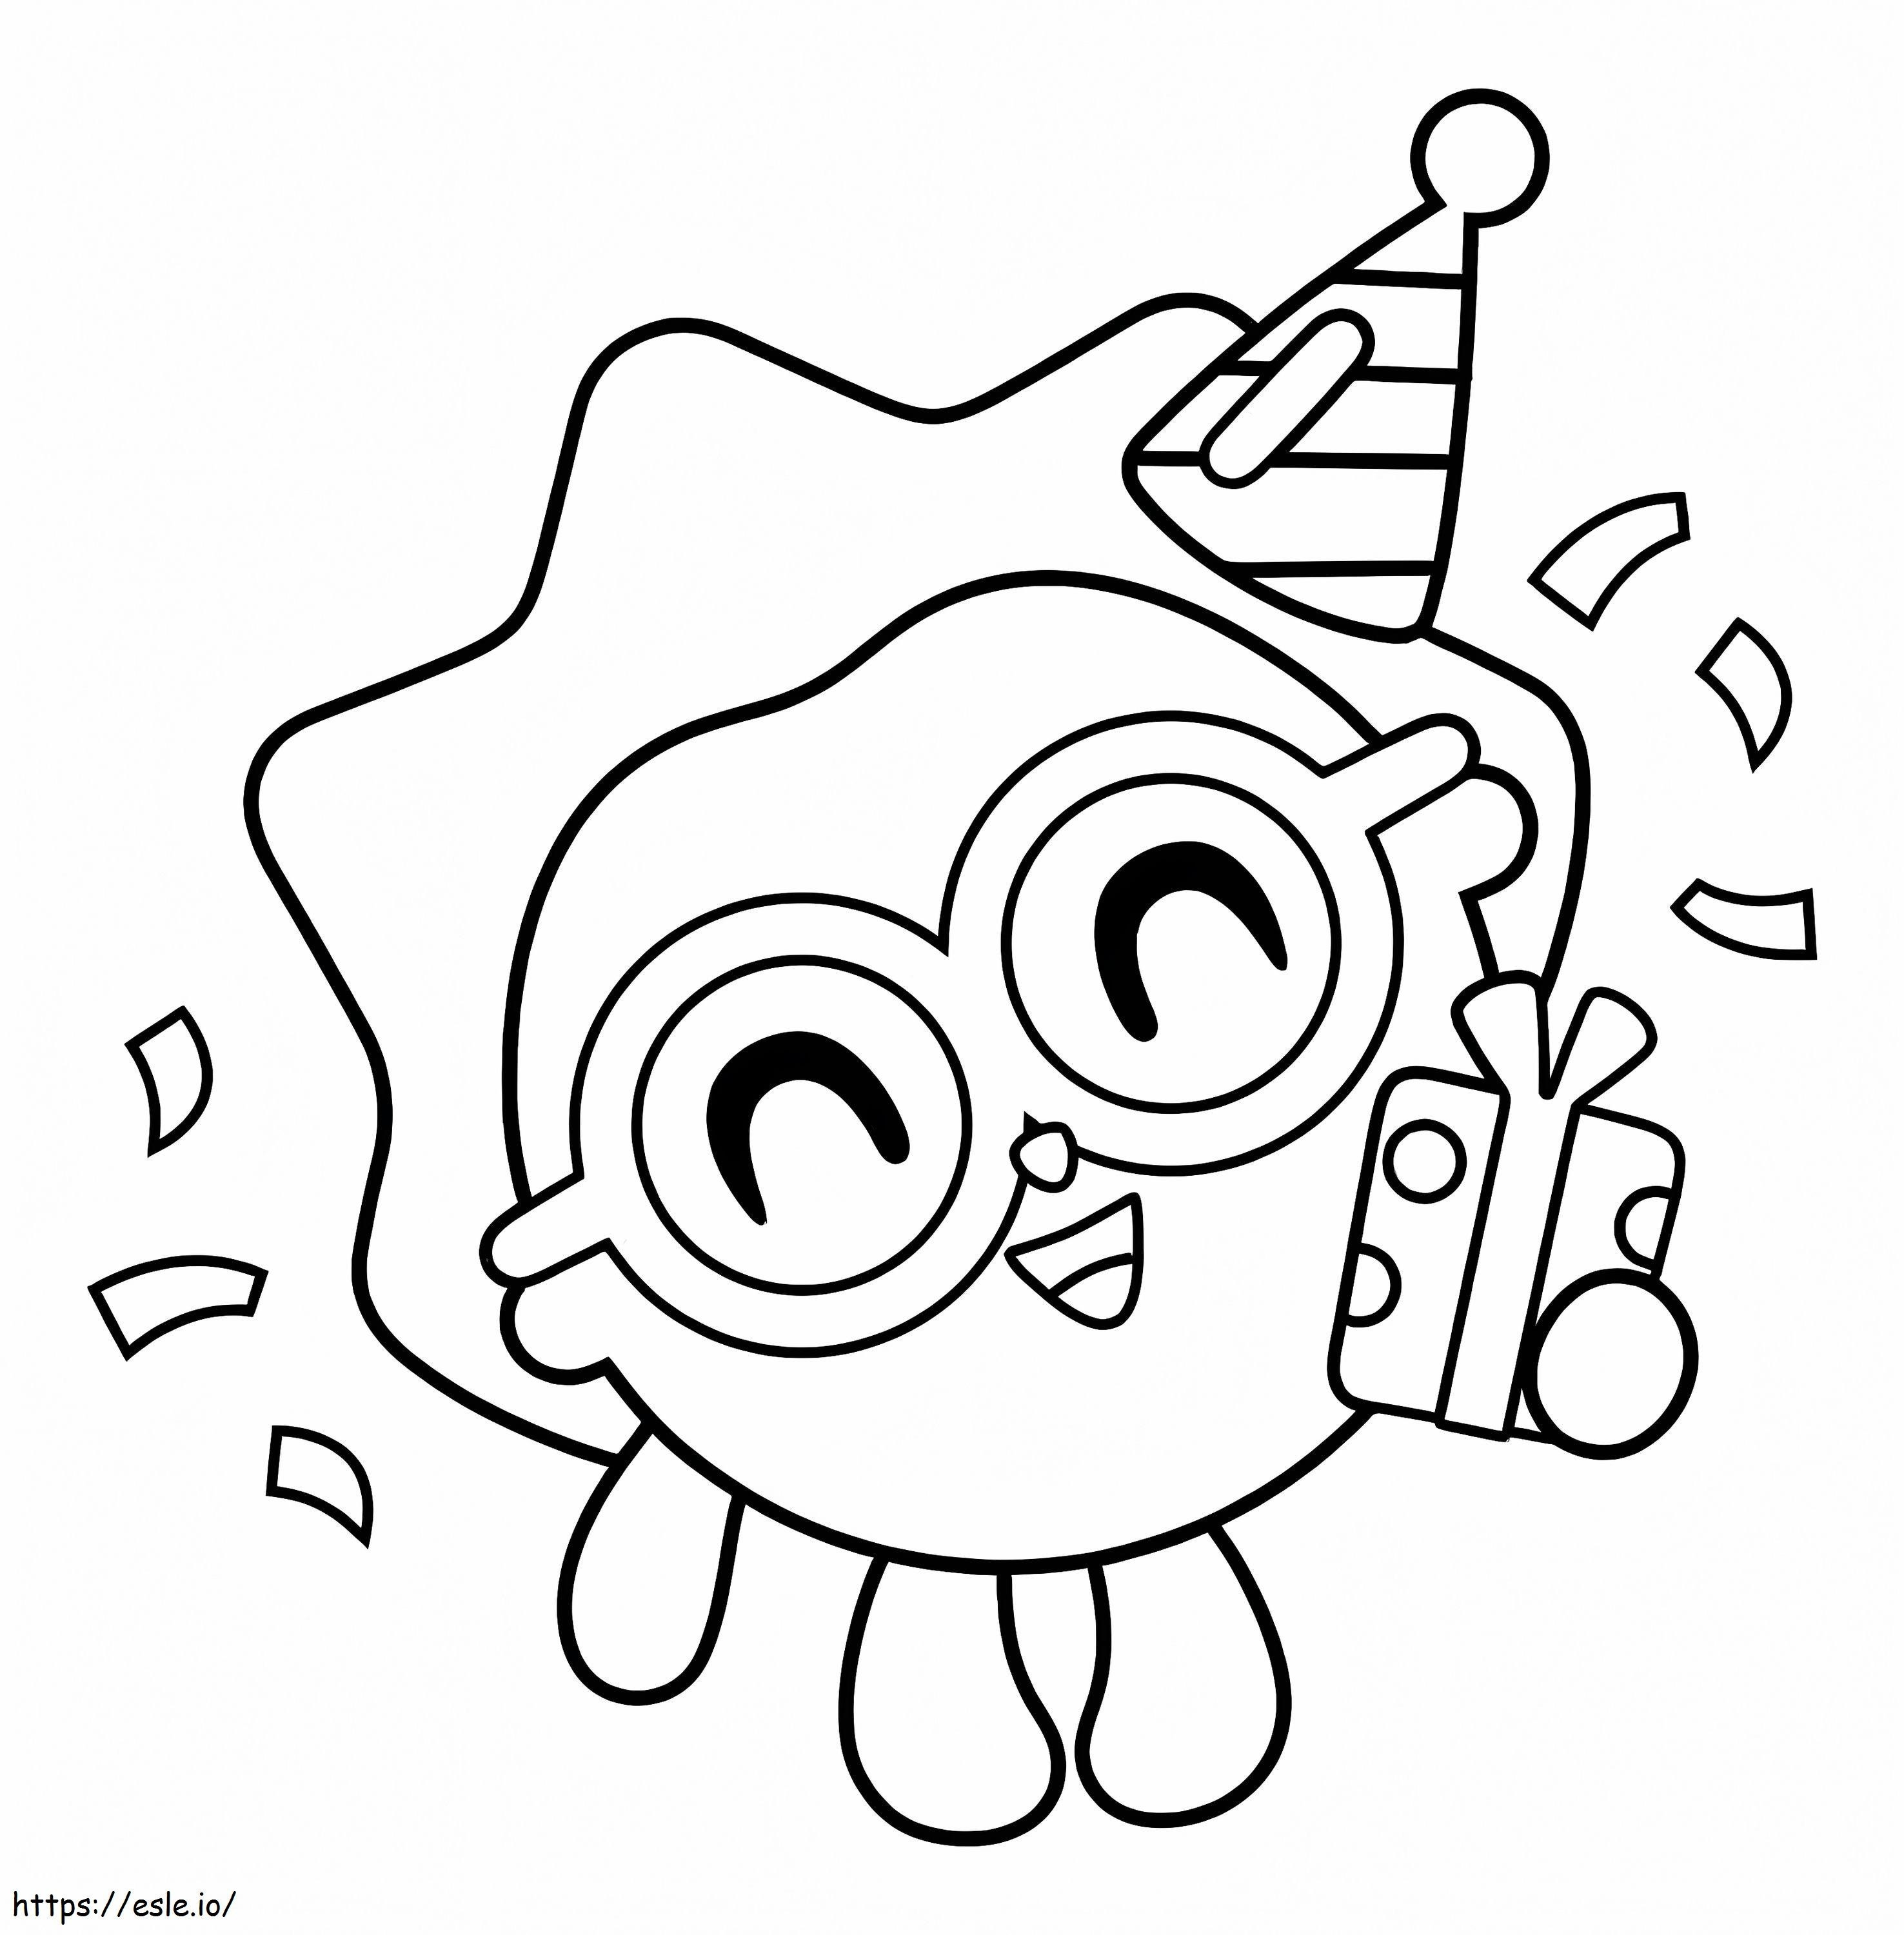 Chichis Birthday coloring page